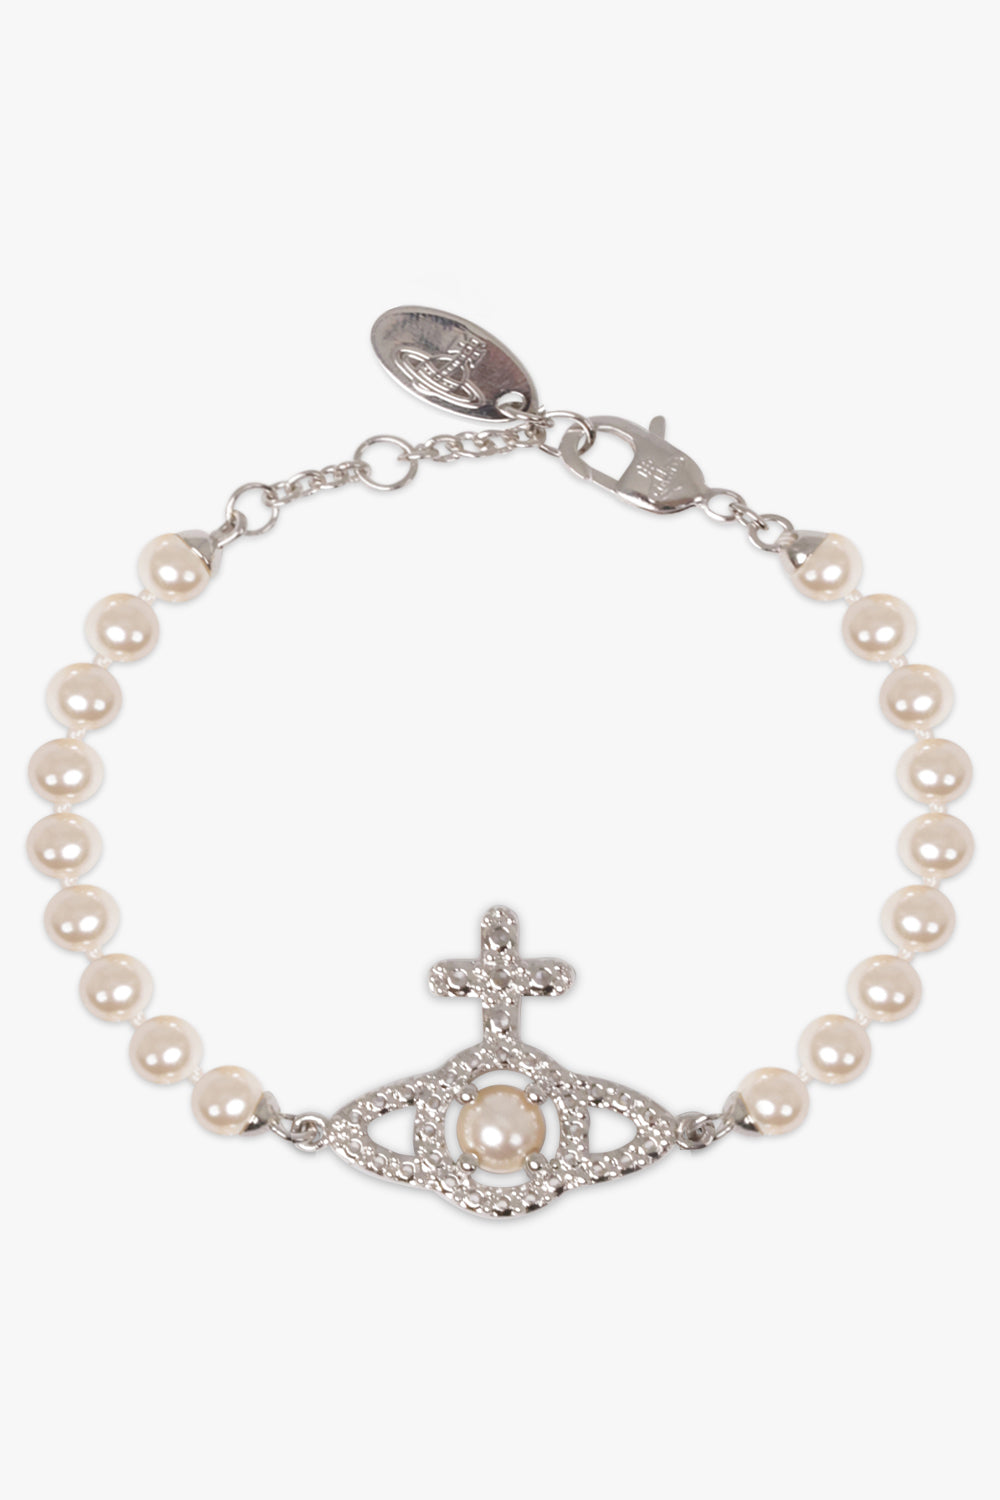 VIVIENNE WESTWOOD JEWELLRY SILVER / SILVER OLYMPIA PEARL BRACELET | CREAM ROSE PEARL/SILVER